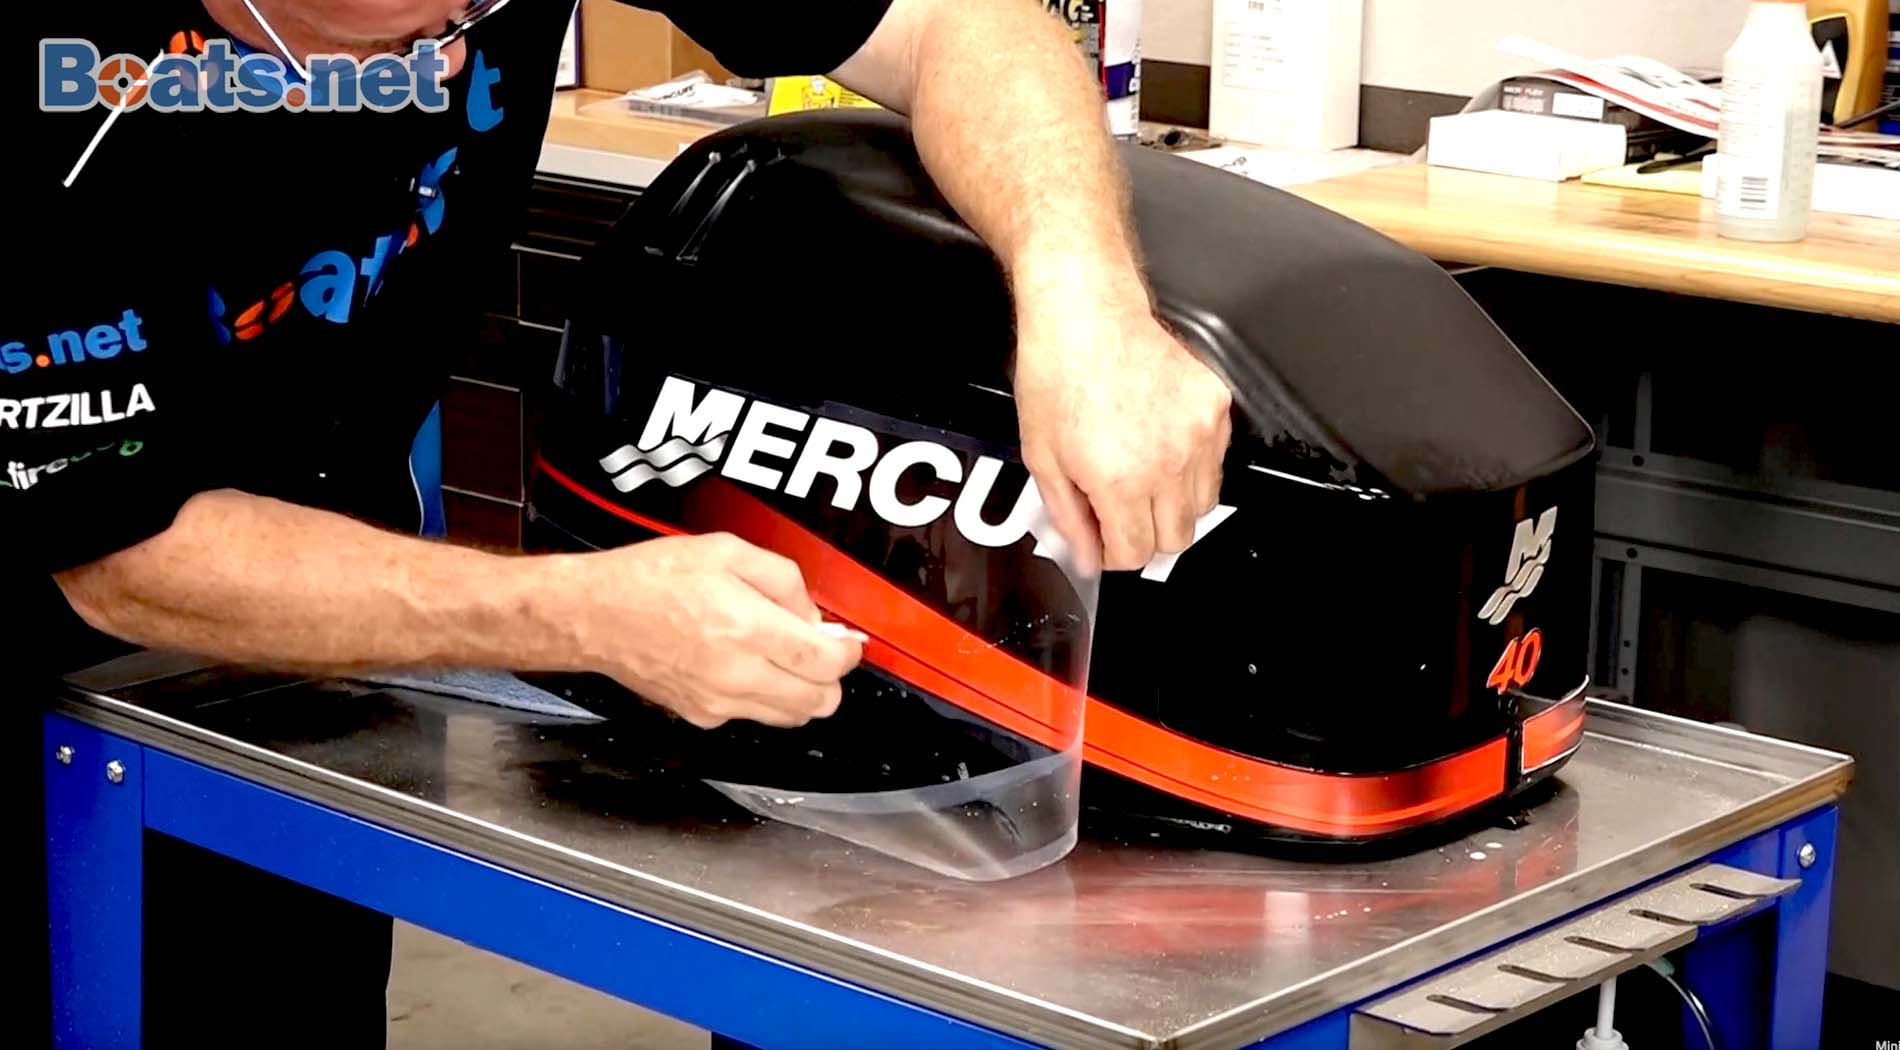 Mercury outboard decal replacement